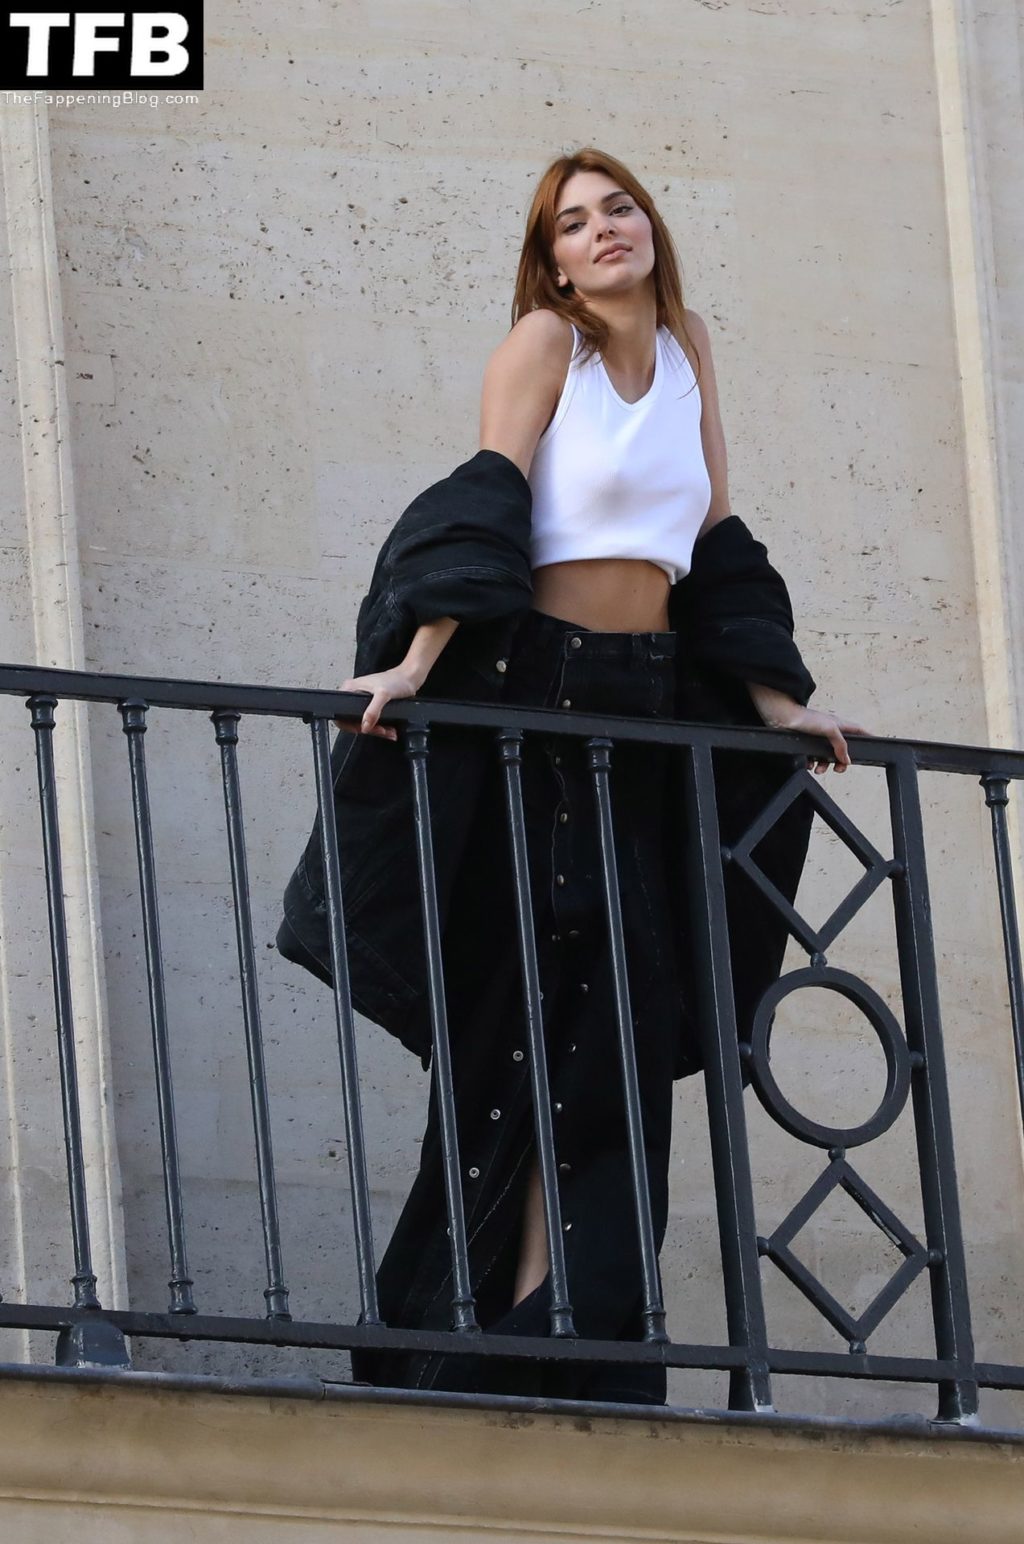 Kendall Jenner Braless The Fappening Blog 97 1024x1544 - Braless Kendall Jenner Poses in Paris (141 Photos)